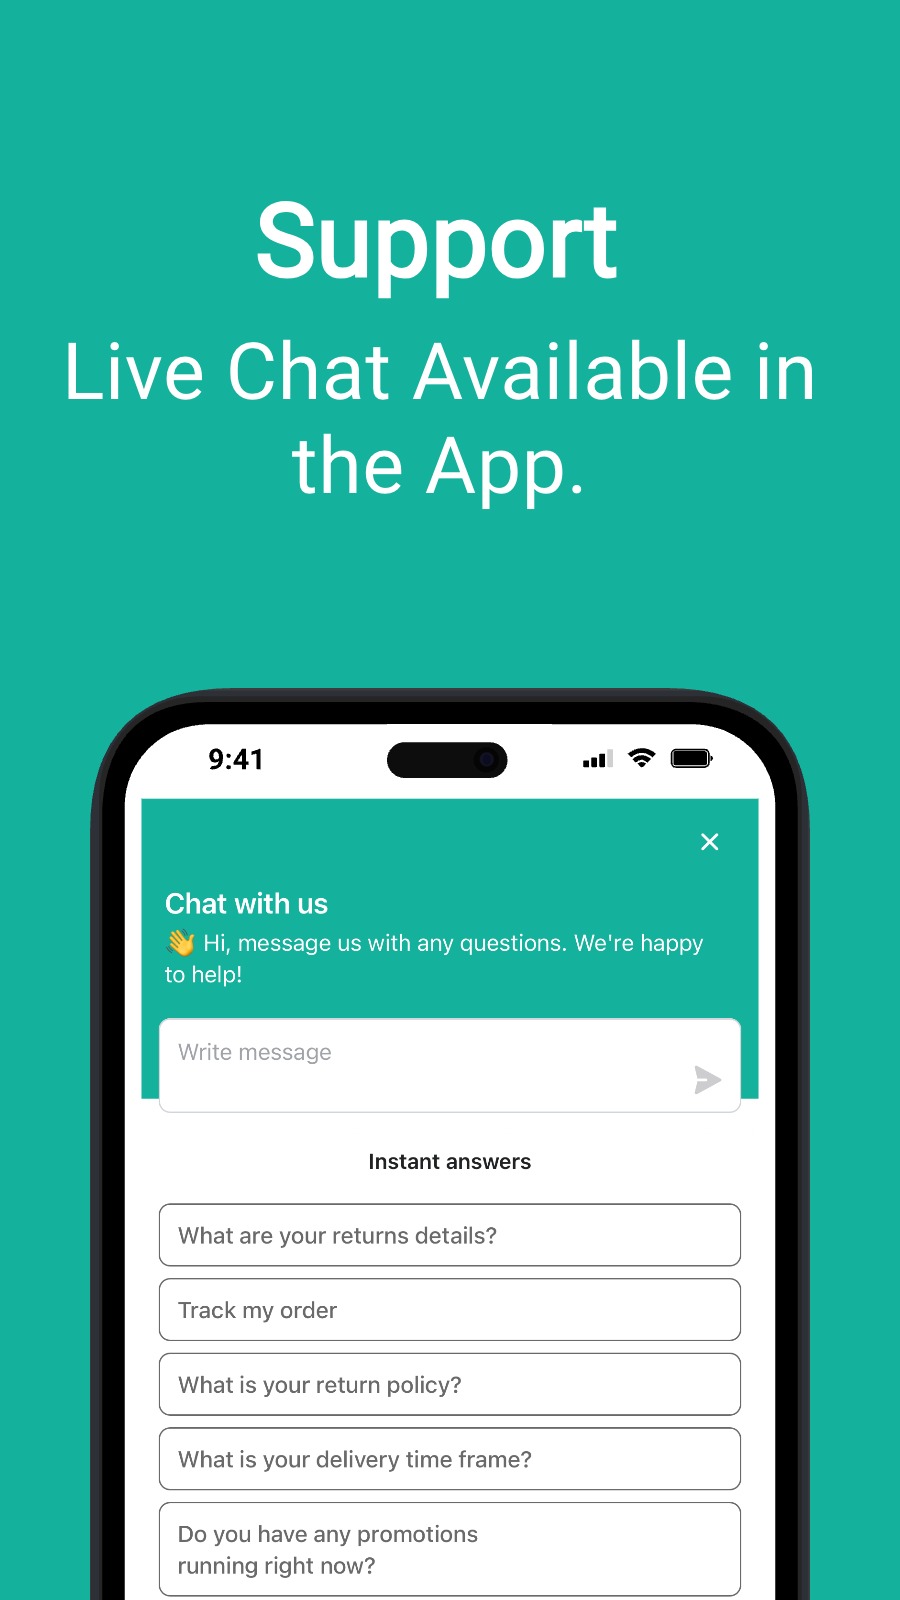 Support - Live Chat Available in the App.